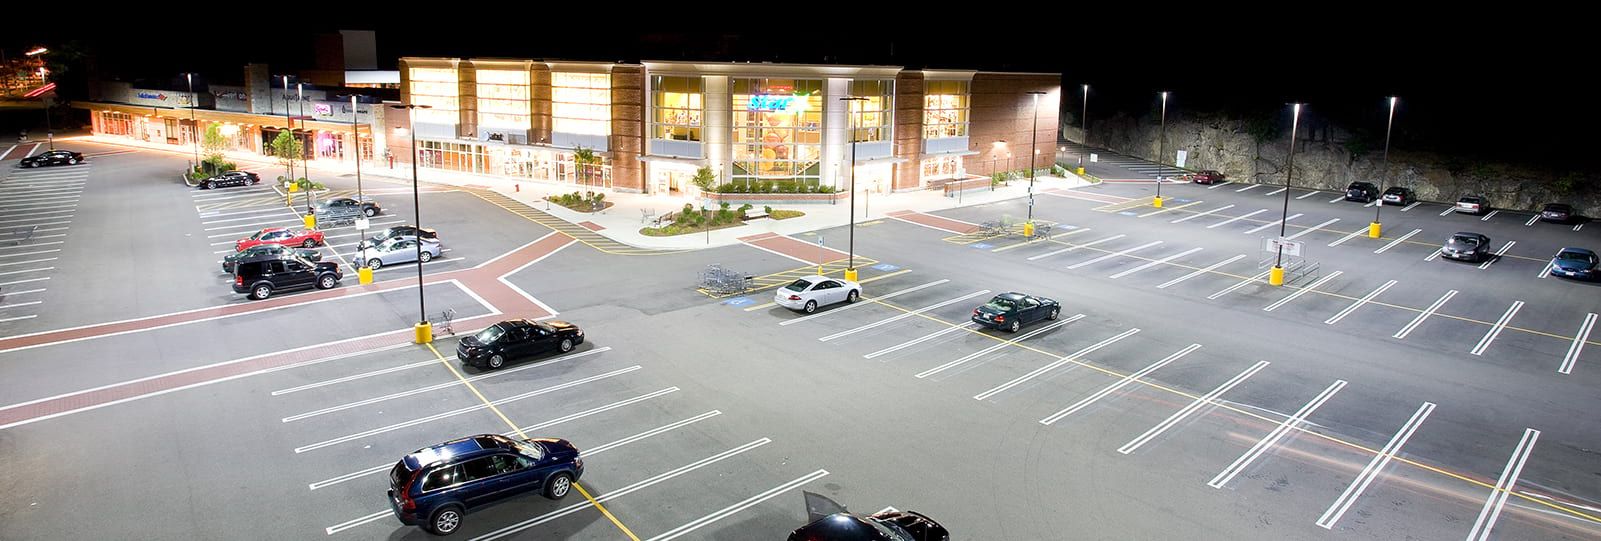 Retail store parking lot that is well lit with storefront lighting fixtures